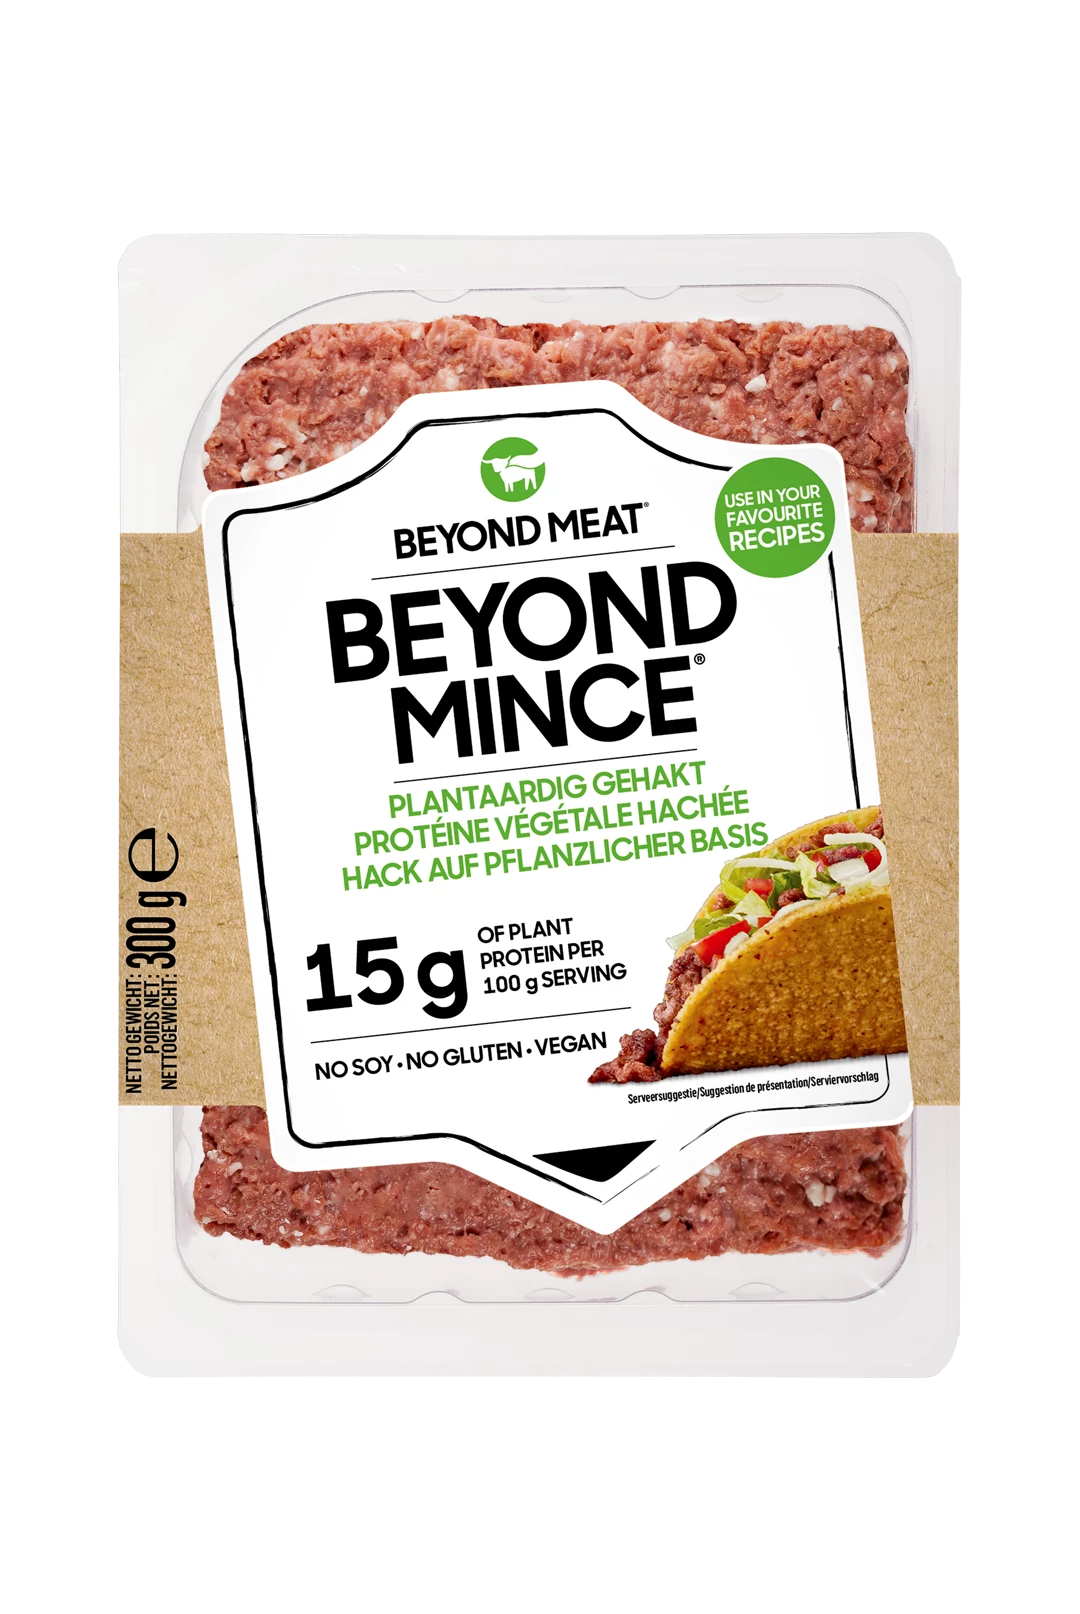 Vg Emince Beyond Meat 300g